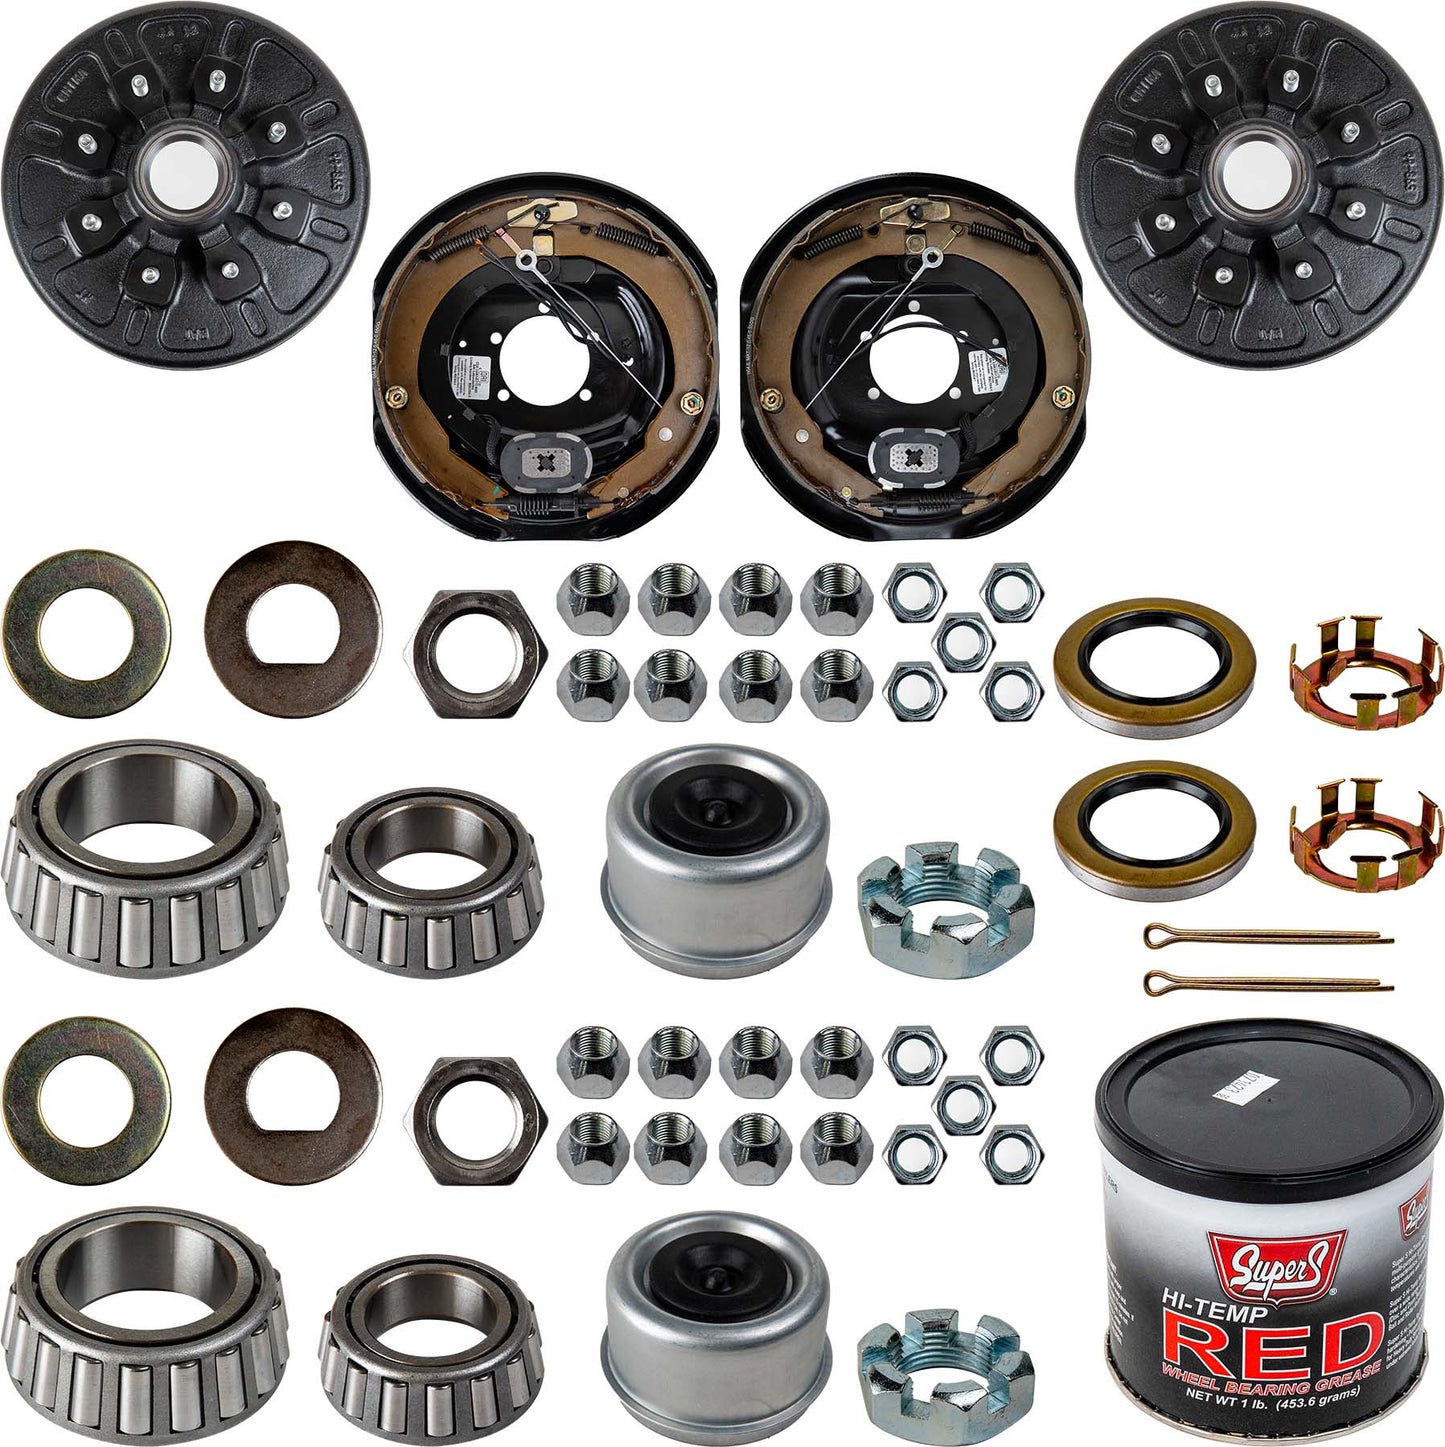 7000 lb Trailer Axle Electric Brake TK Service Kit - 7k Capacity - The Trailer Parts Outlet